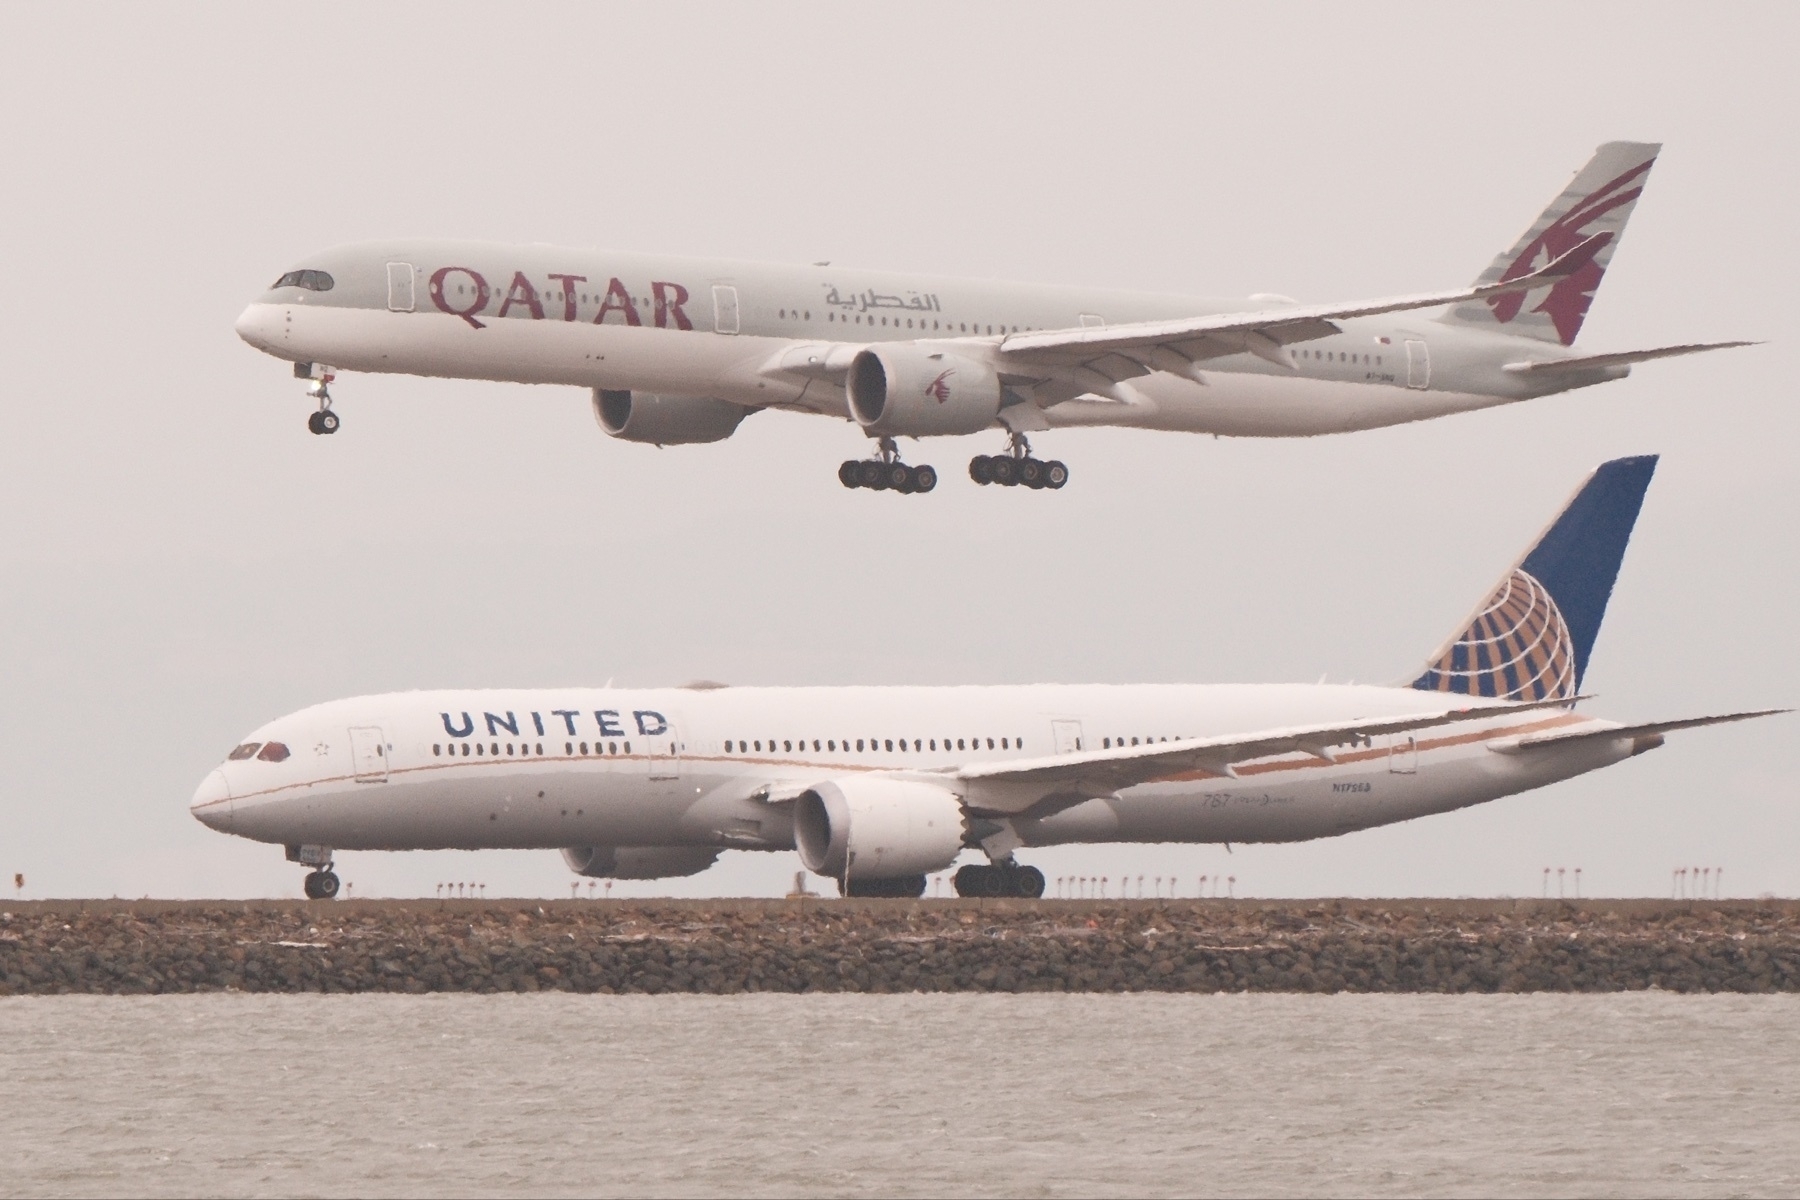 A United 787 prepares for take off, while above, a Qatar 777 airliner lands on an adjacent runway.